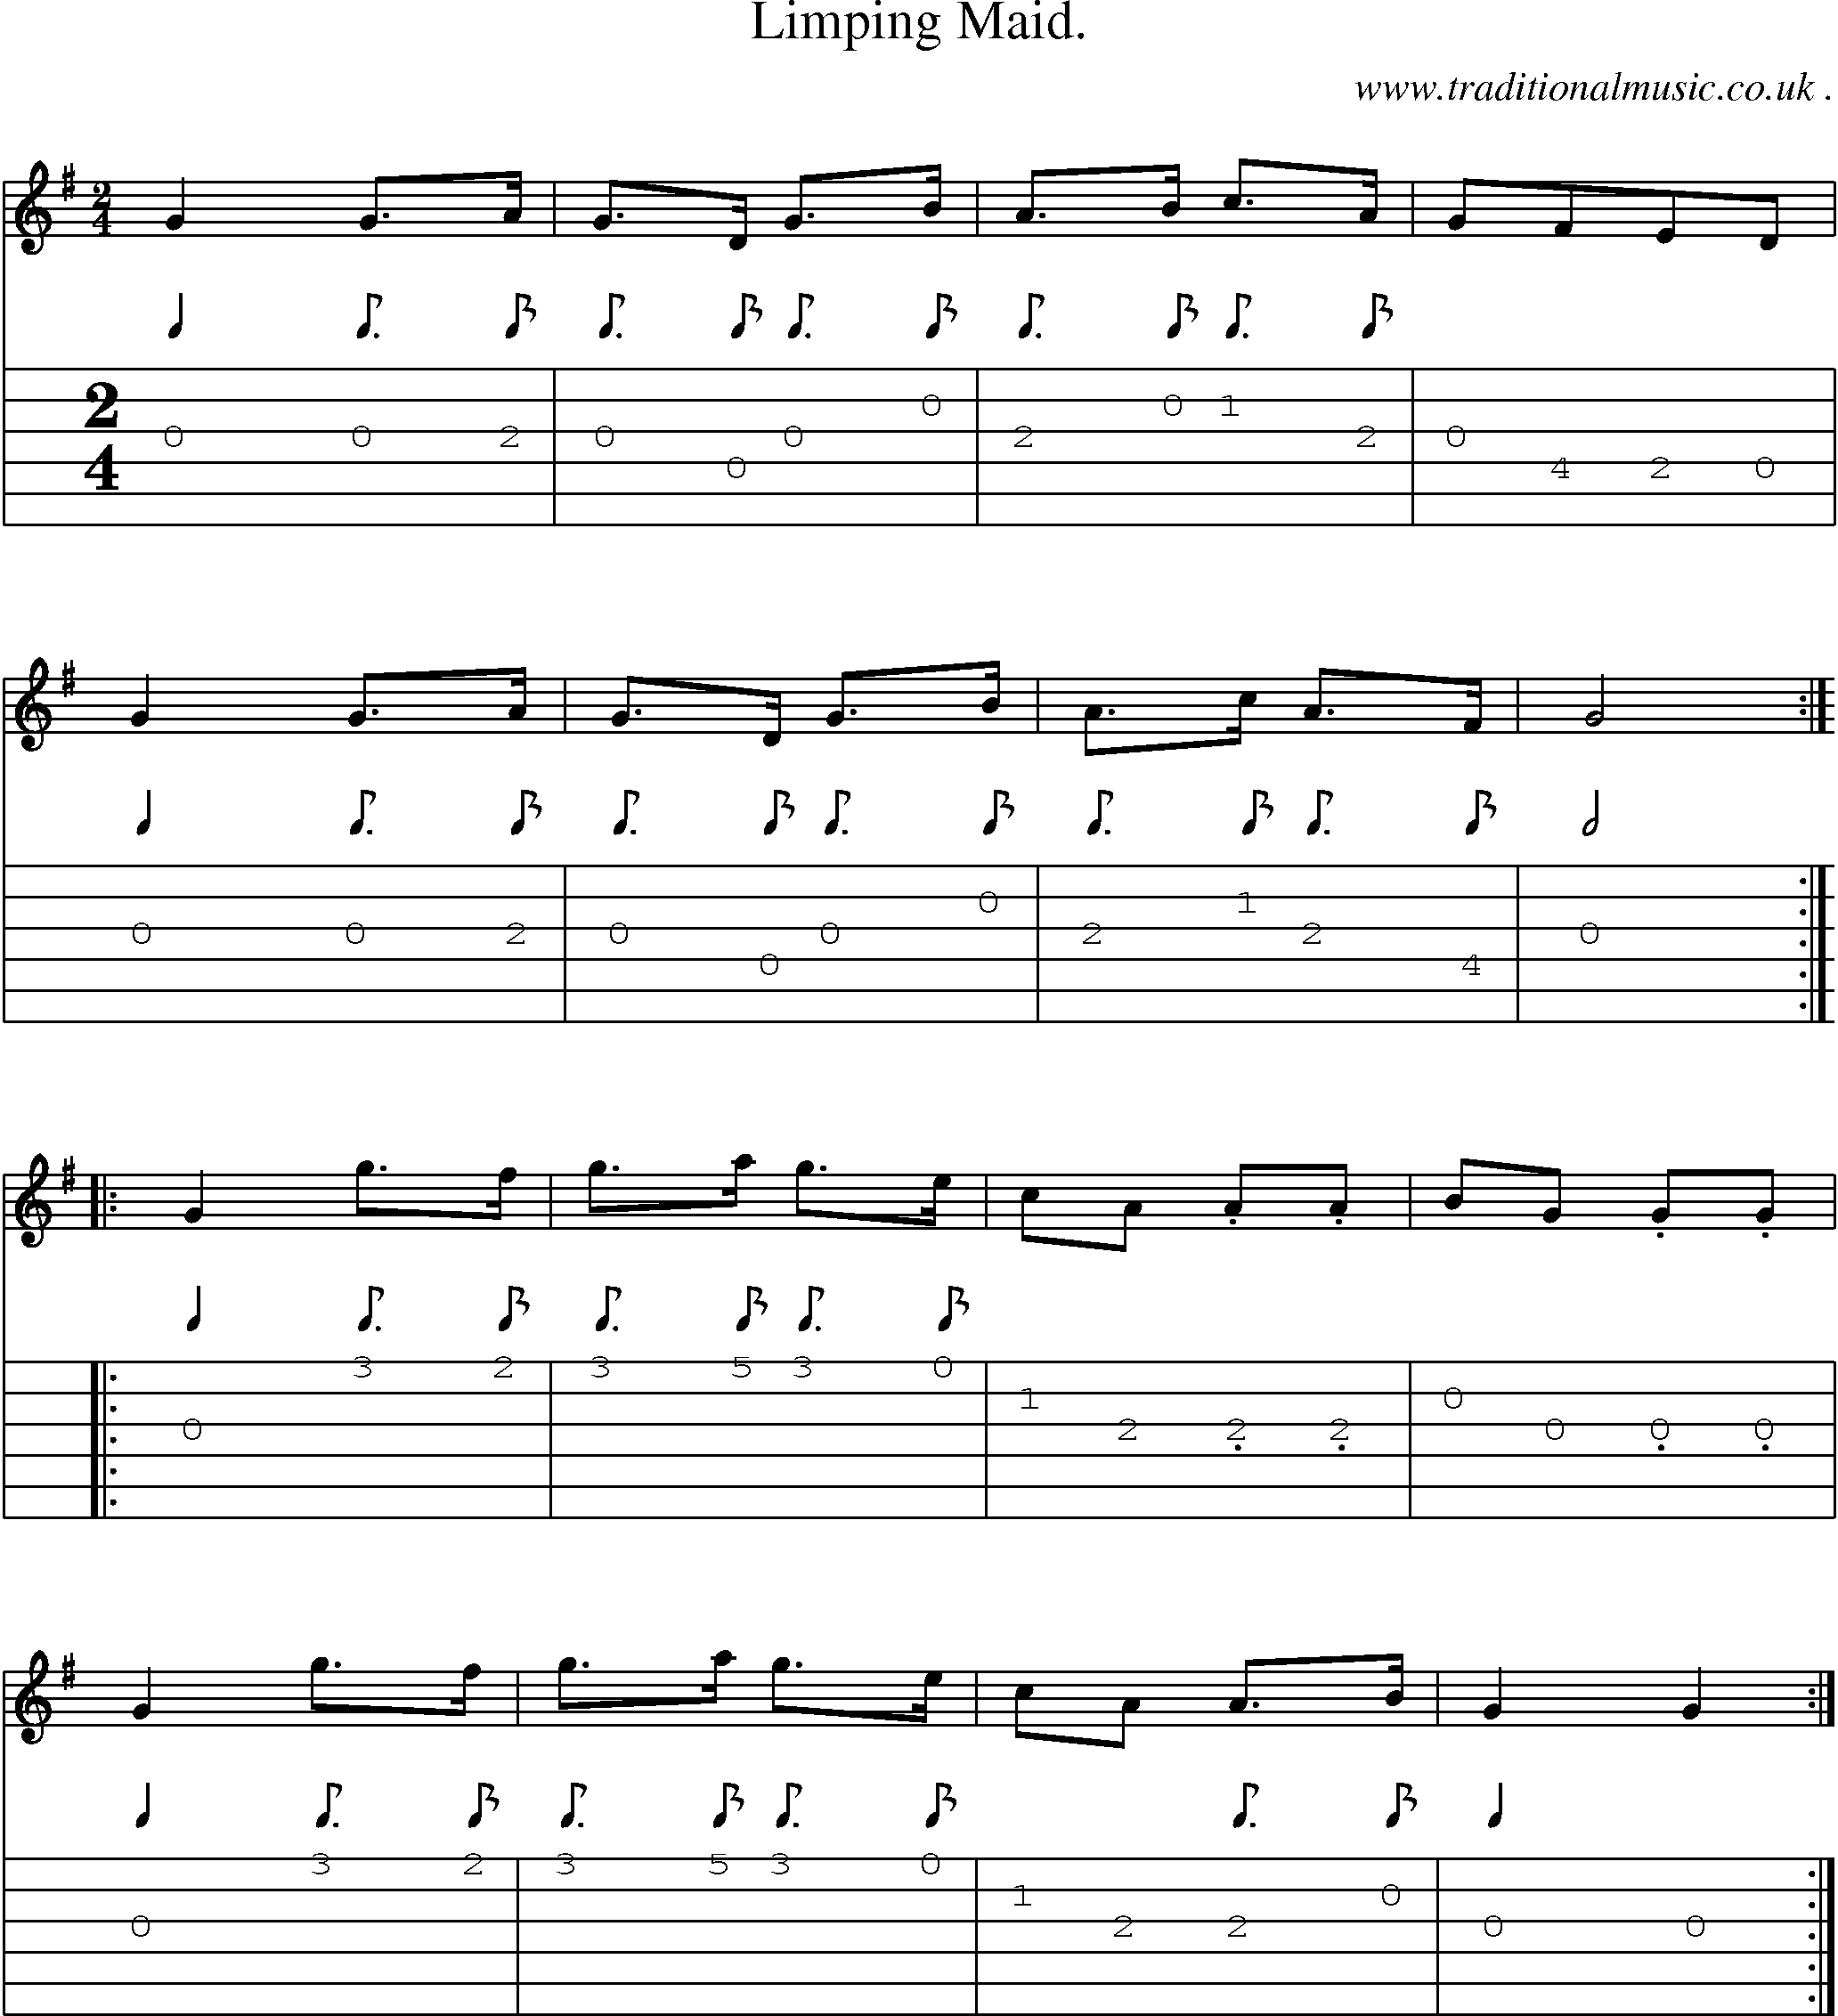 Sheet-Music and Guitar Tabs for Limping Maid